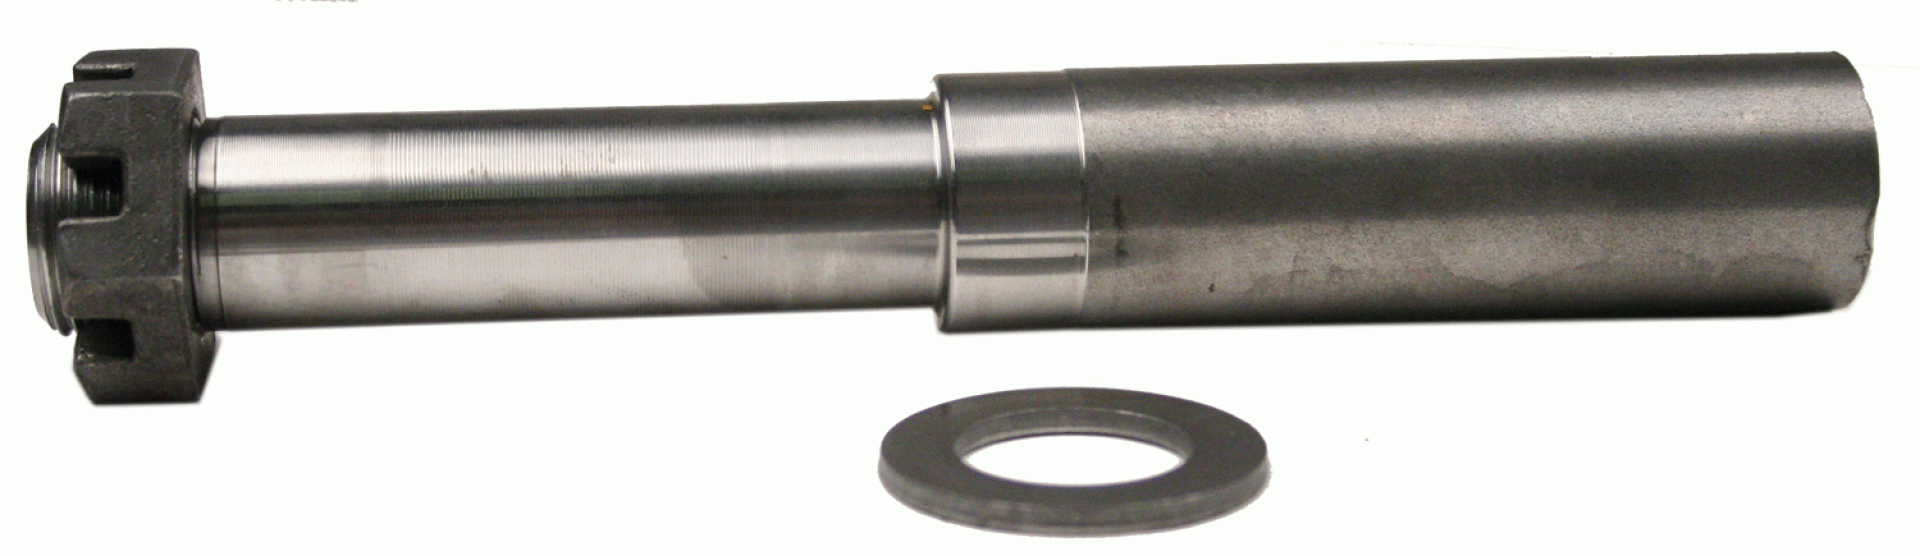 N TOW | 0332 | ROUND STUB STRAIGHT SPINDLE - CAPACITY PER PAIR: 2000 LBS.